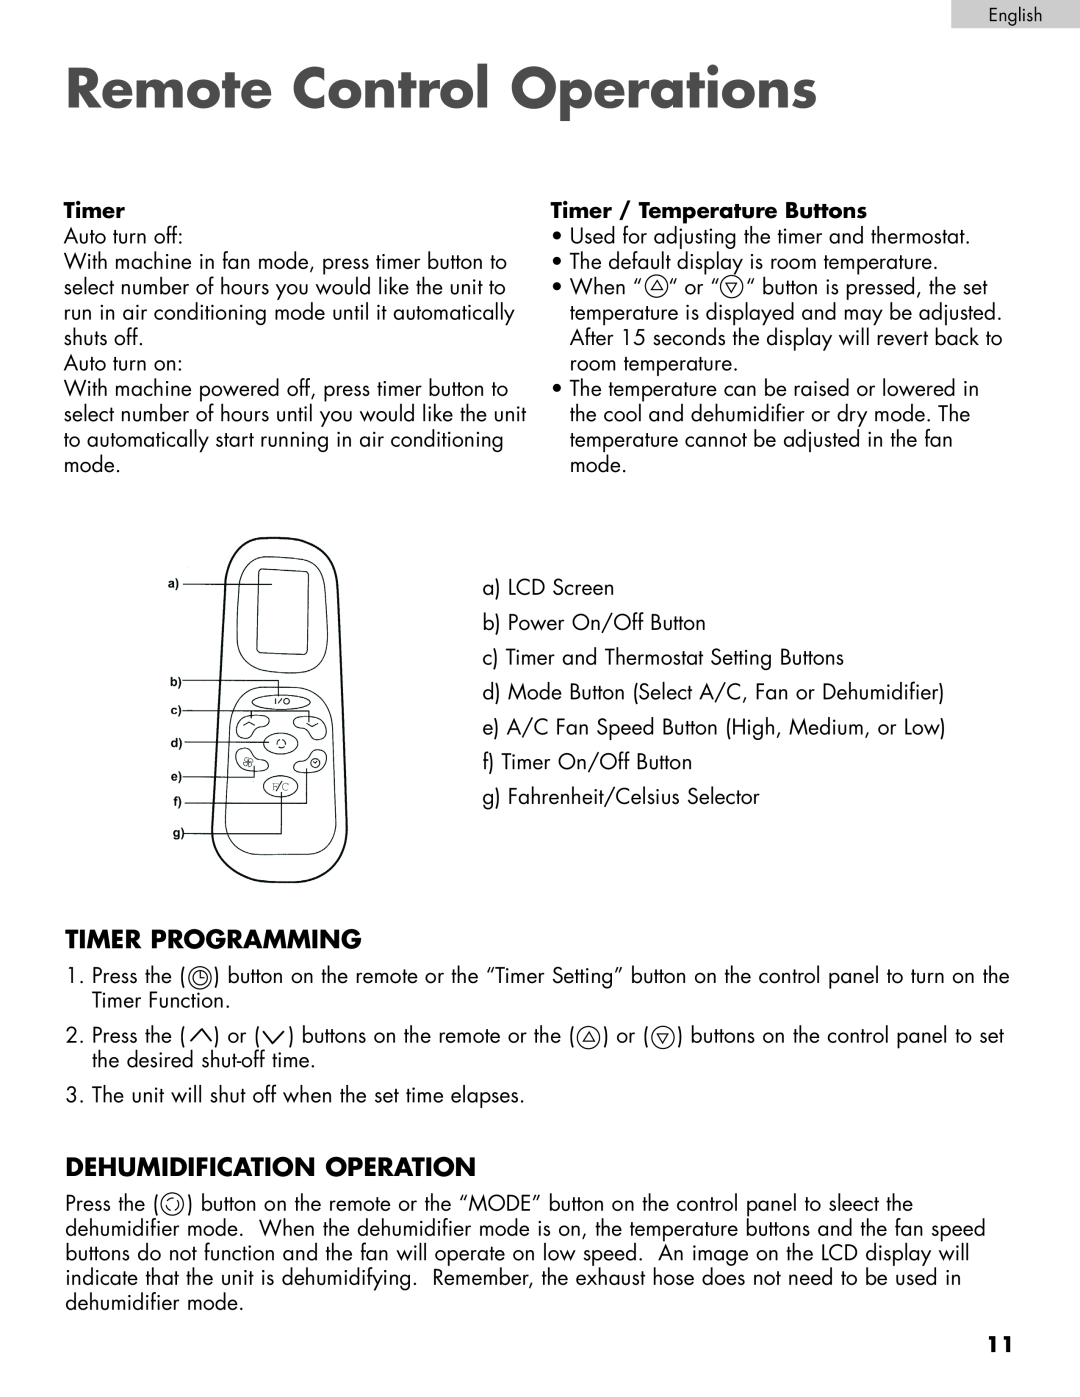 Haier HPRD12XC7 Remote Control Operations, Timer Programming, Dehumidification Operation, Timer / Temperature Buttons 